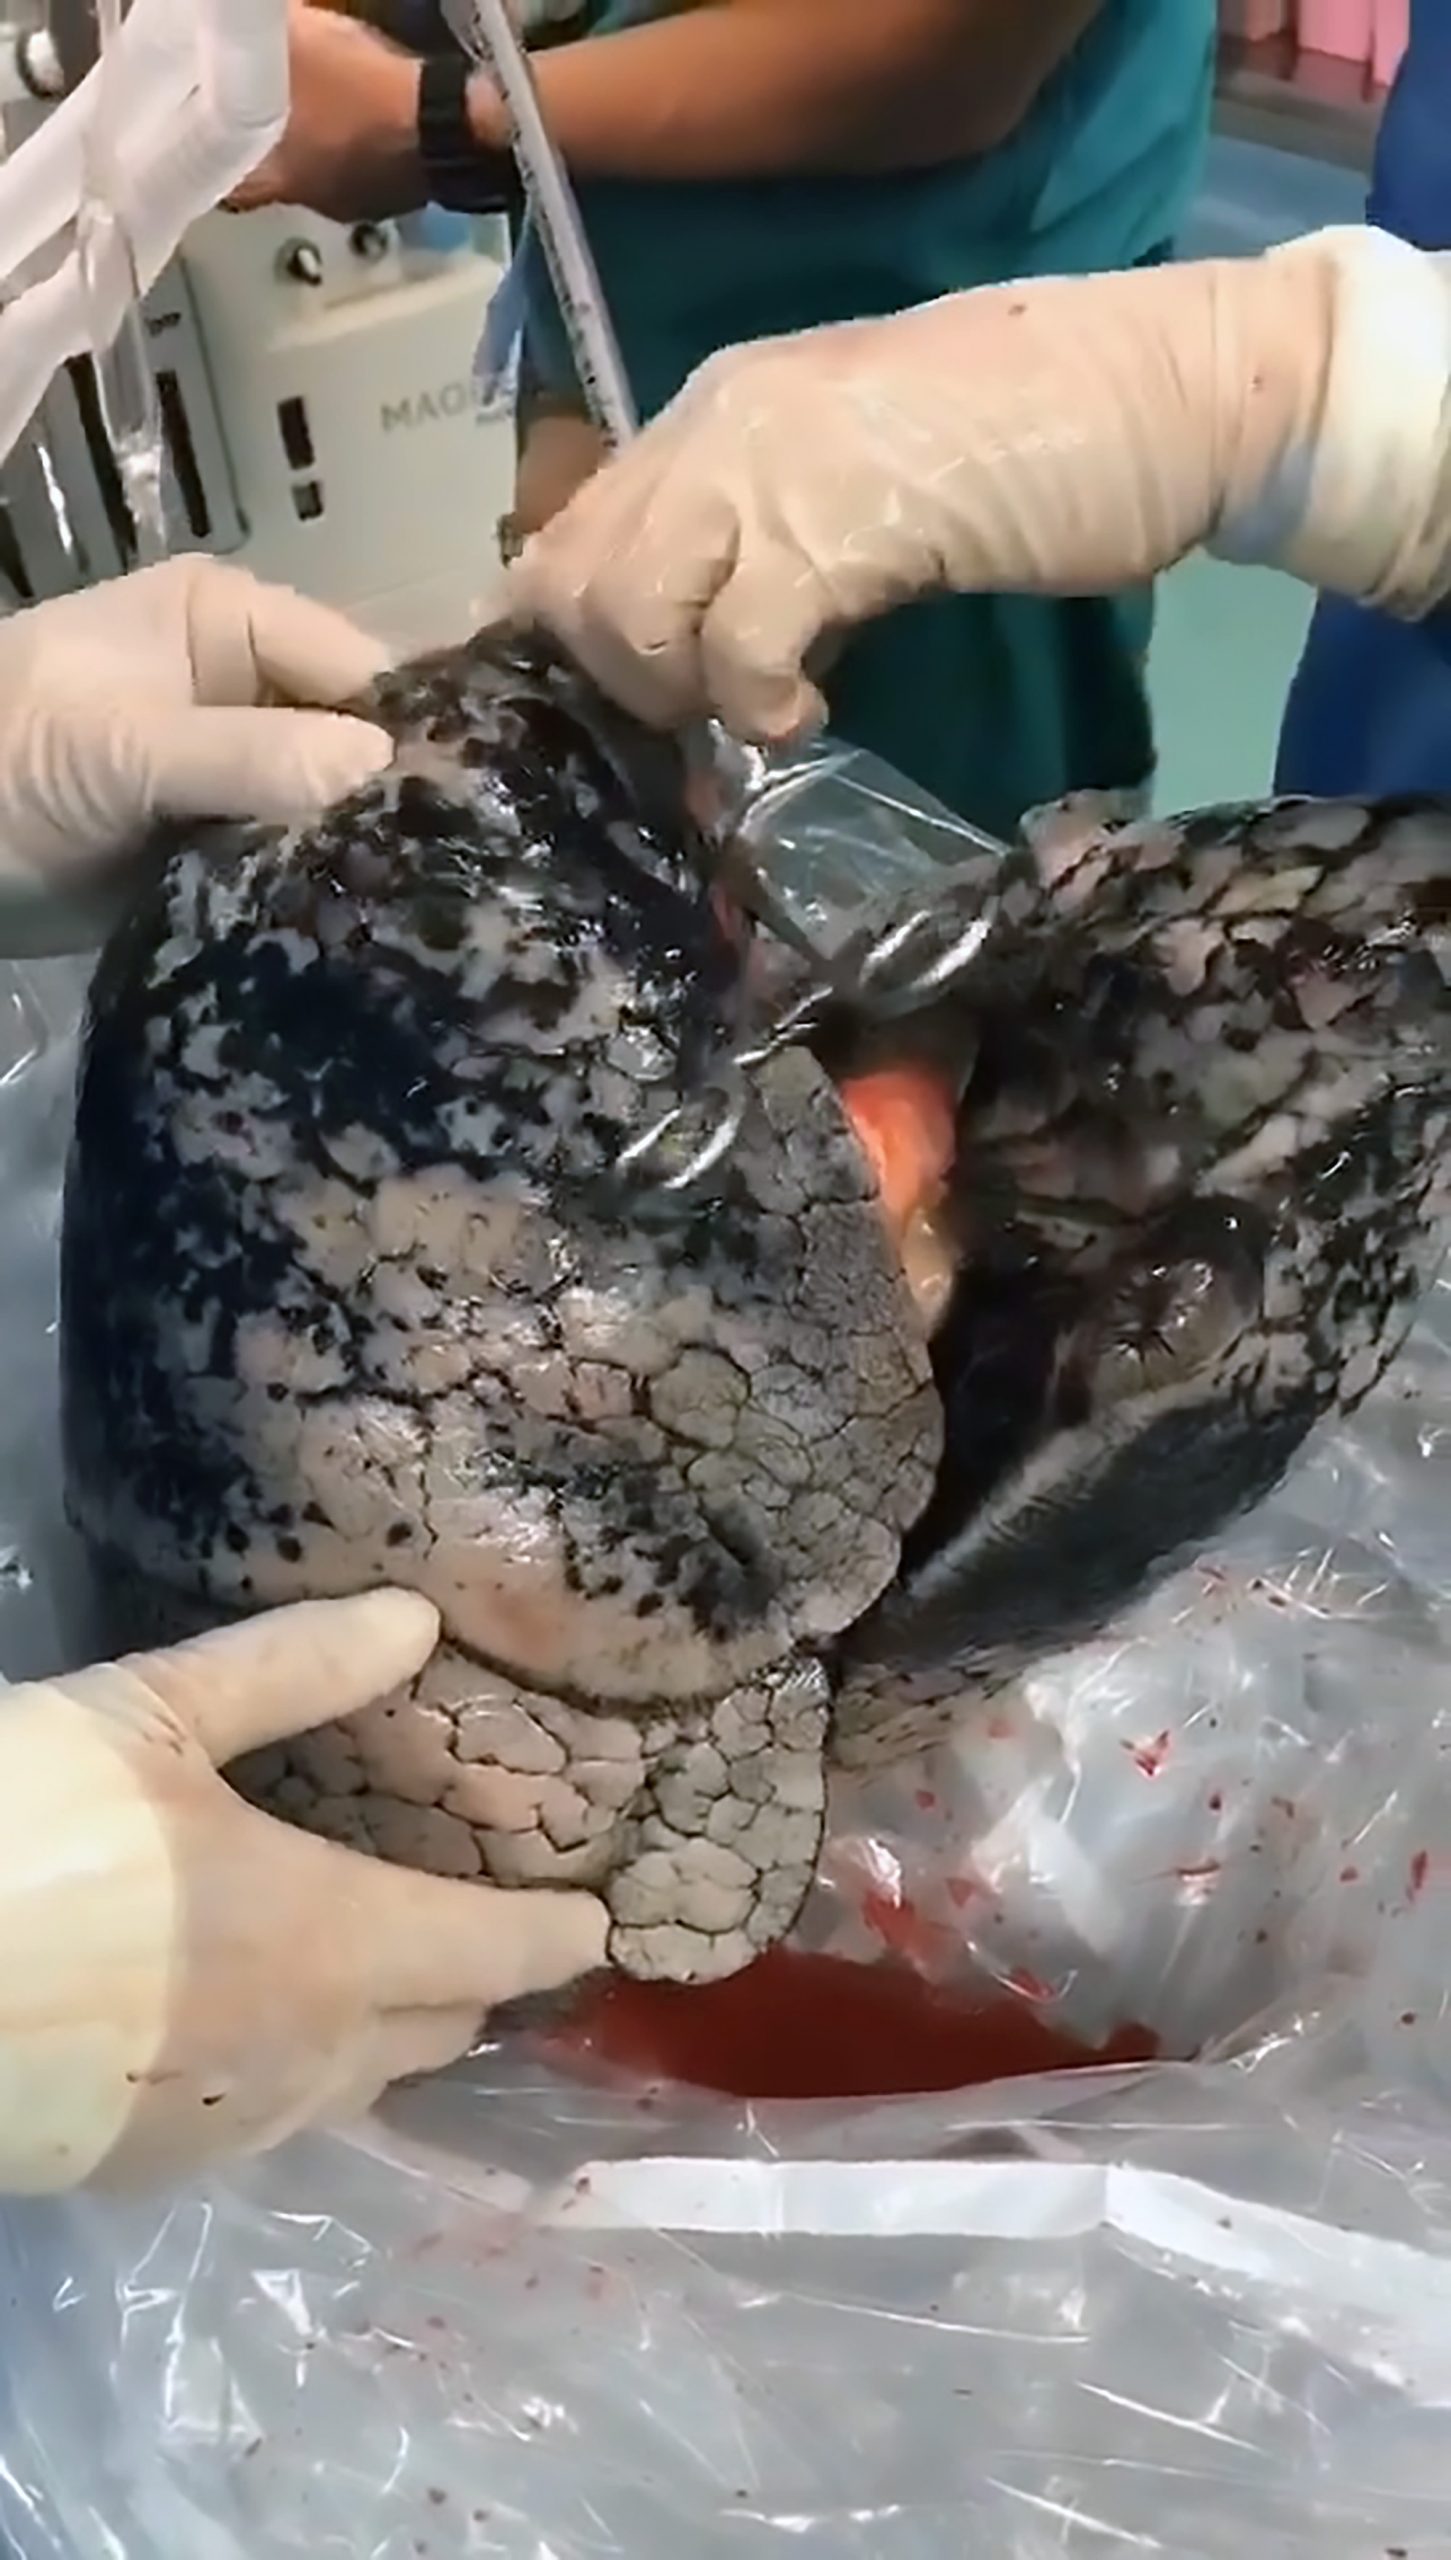 Read more about the article Dr Rejects Blackened Lungs Donated By 30y Chain Smoker